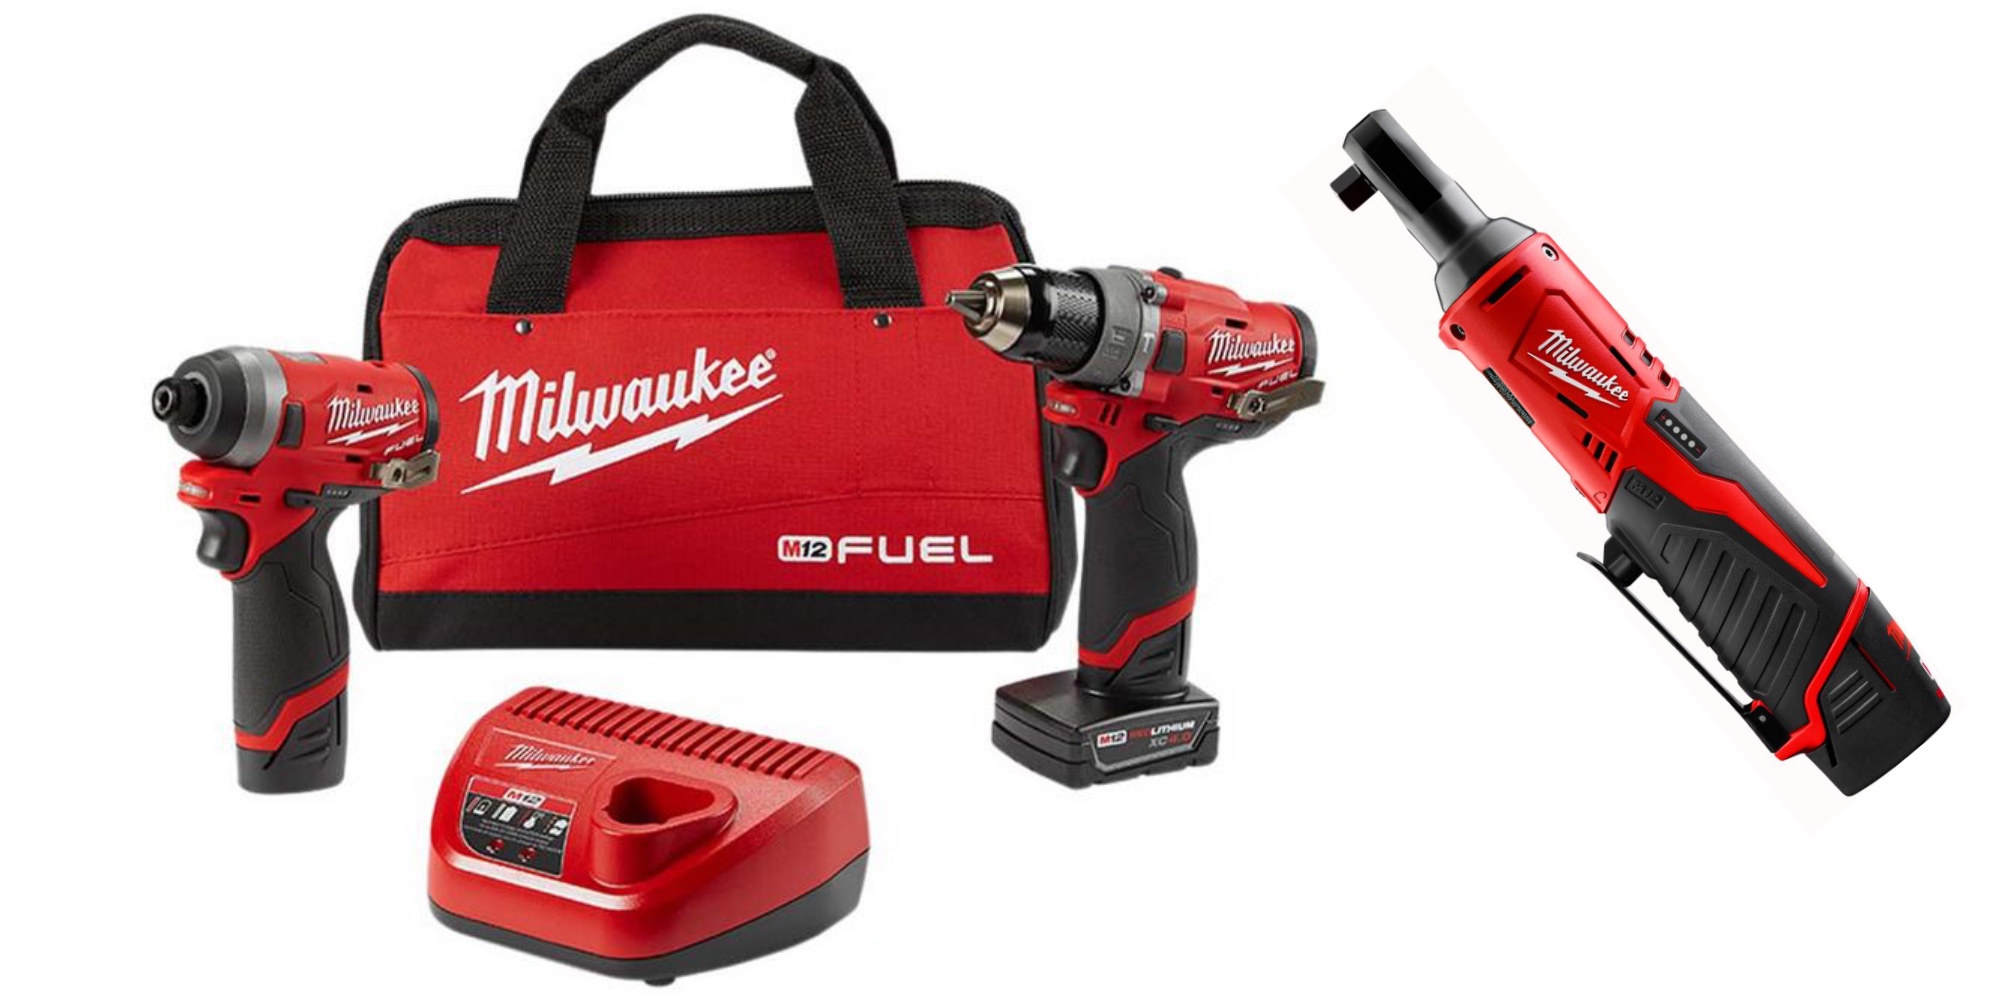 Milwaukees M12 Fuel 12 Volt Combo Kit Gets You Three Tools For 199